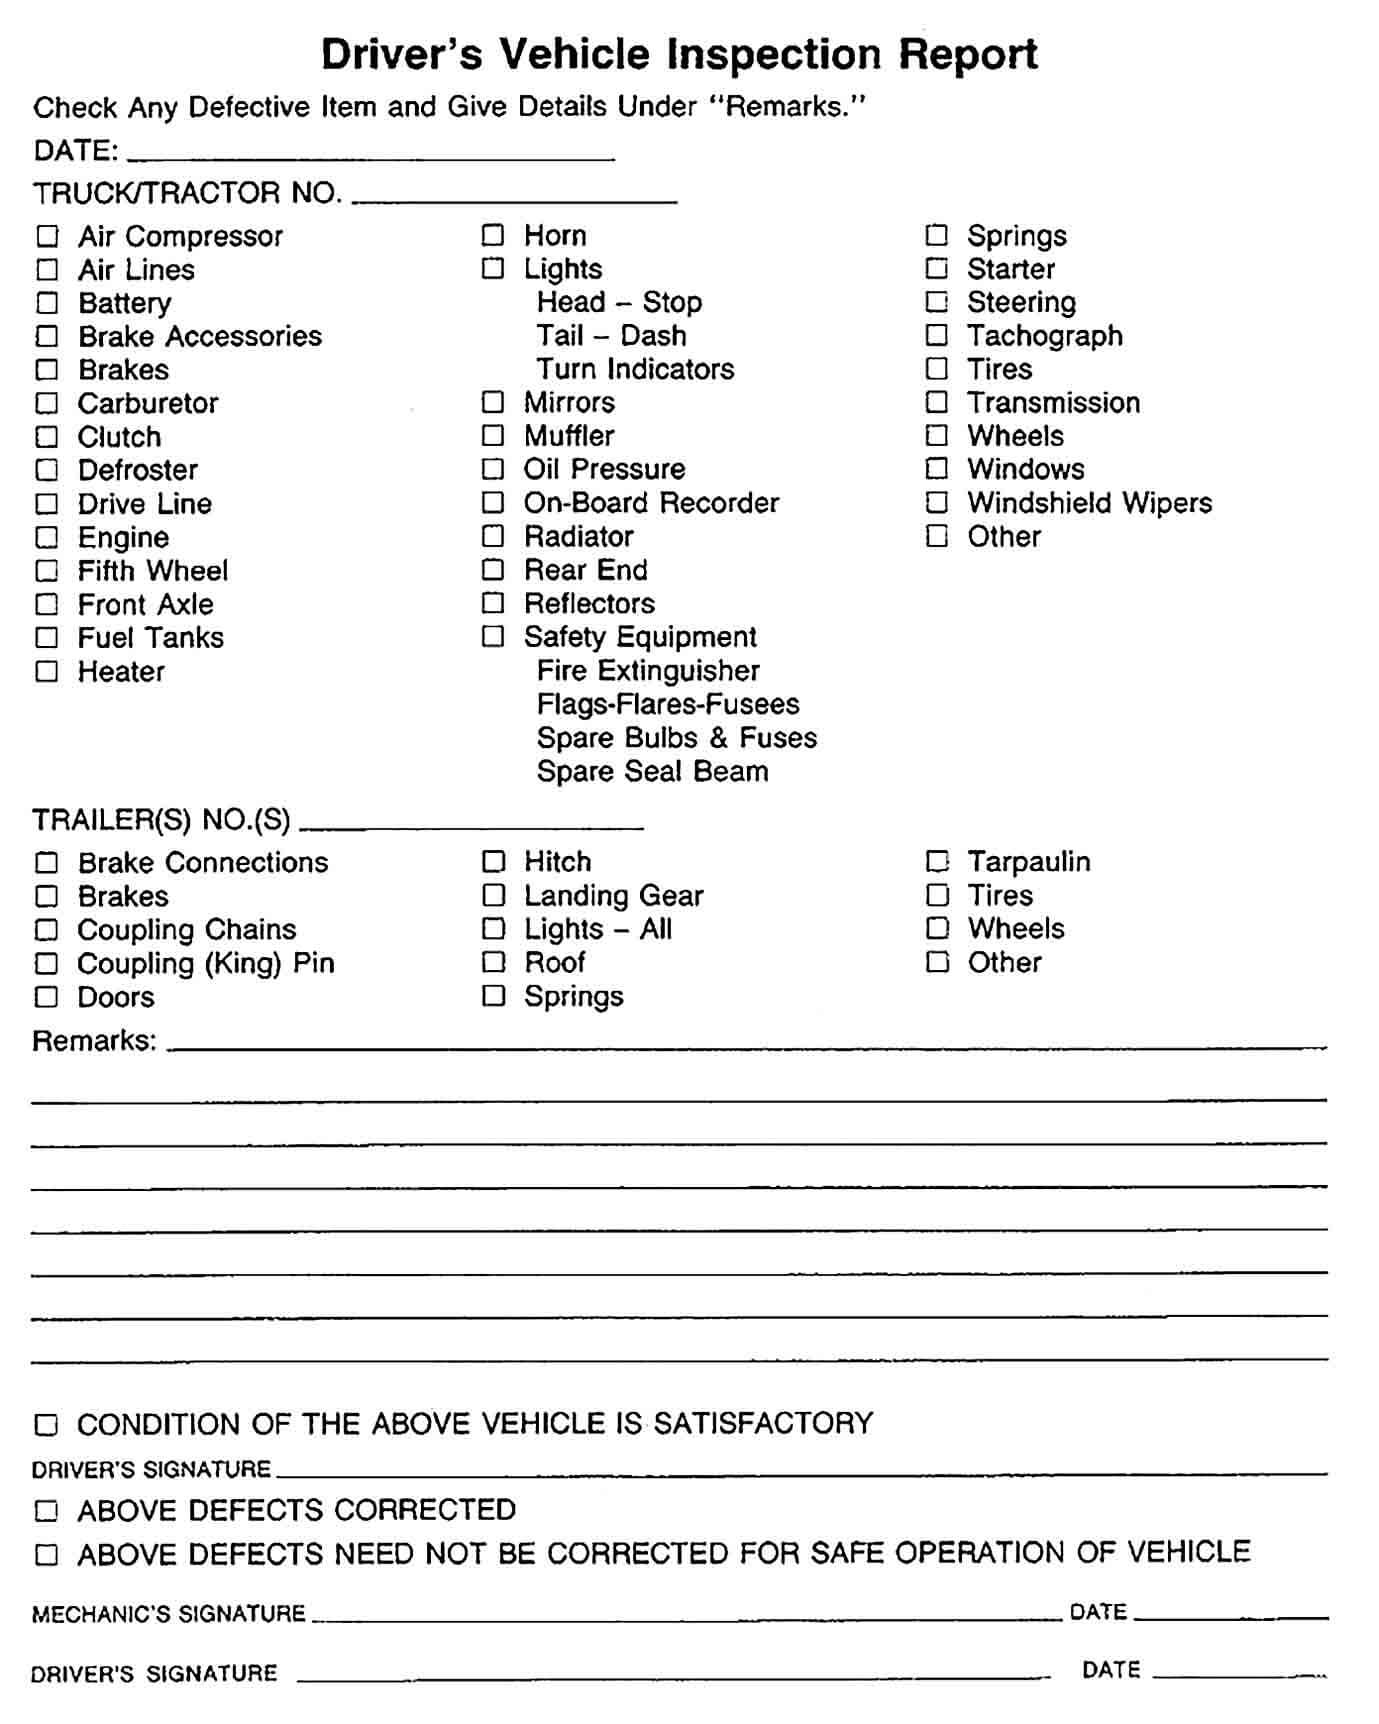 Sample Driver Vehicle Inspection Report Template